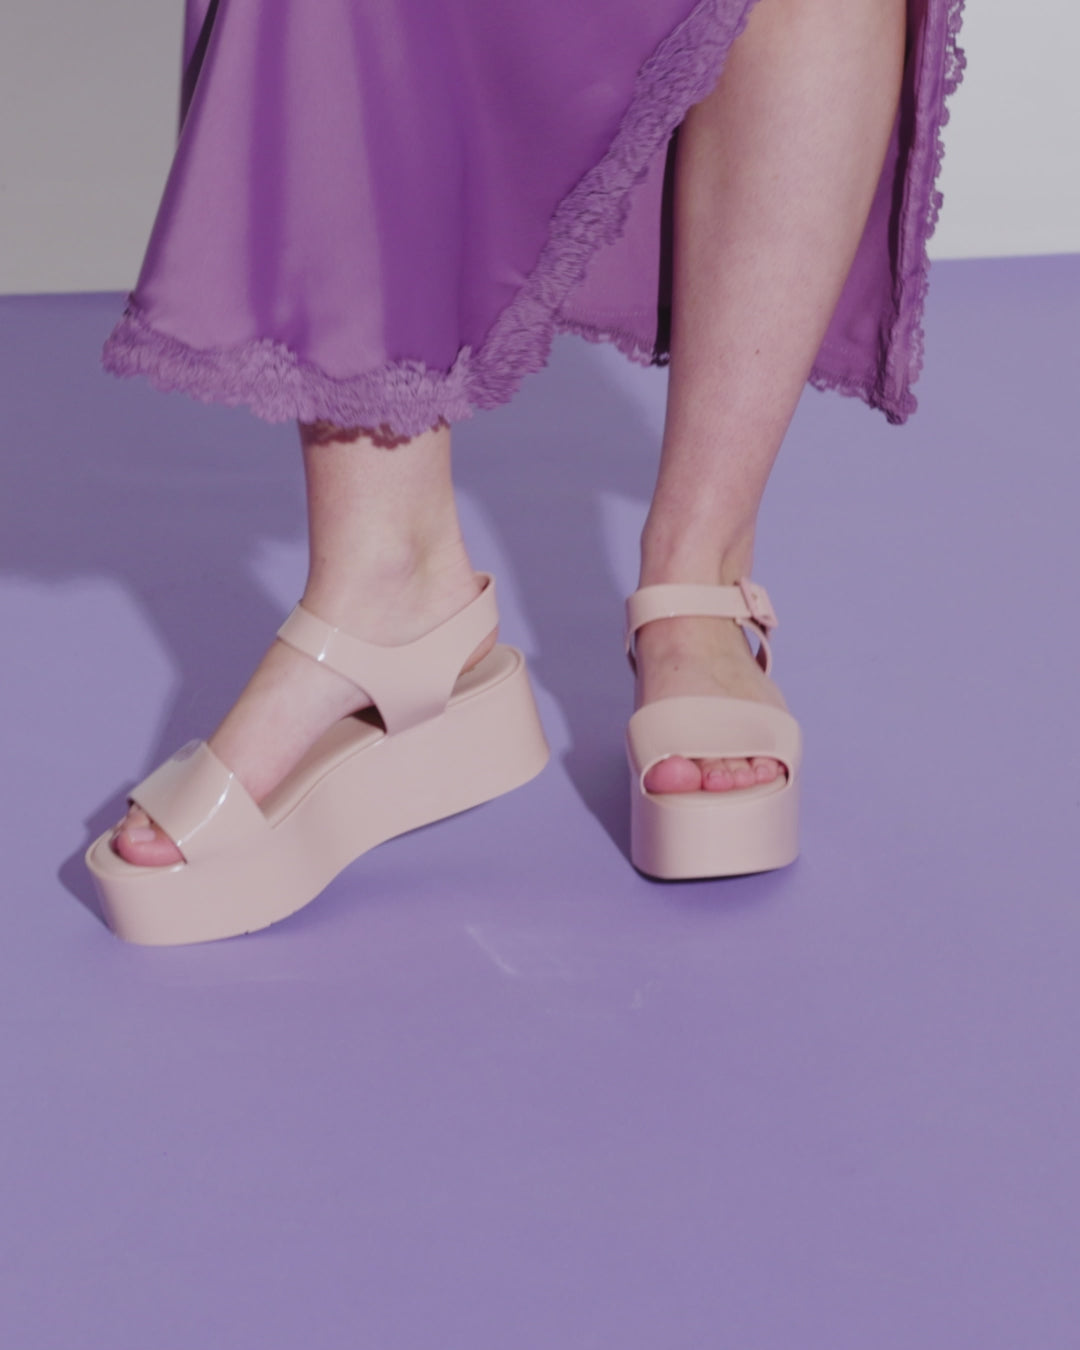 Video with no sound of a model in a purple outfit wearing a pair of light pink Mar Platform Sandals.